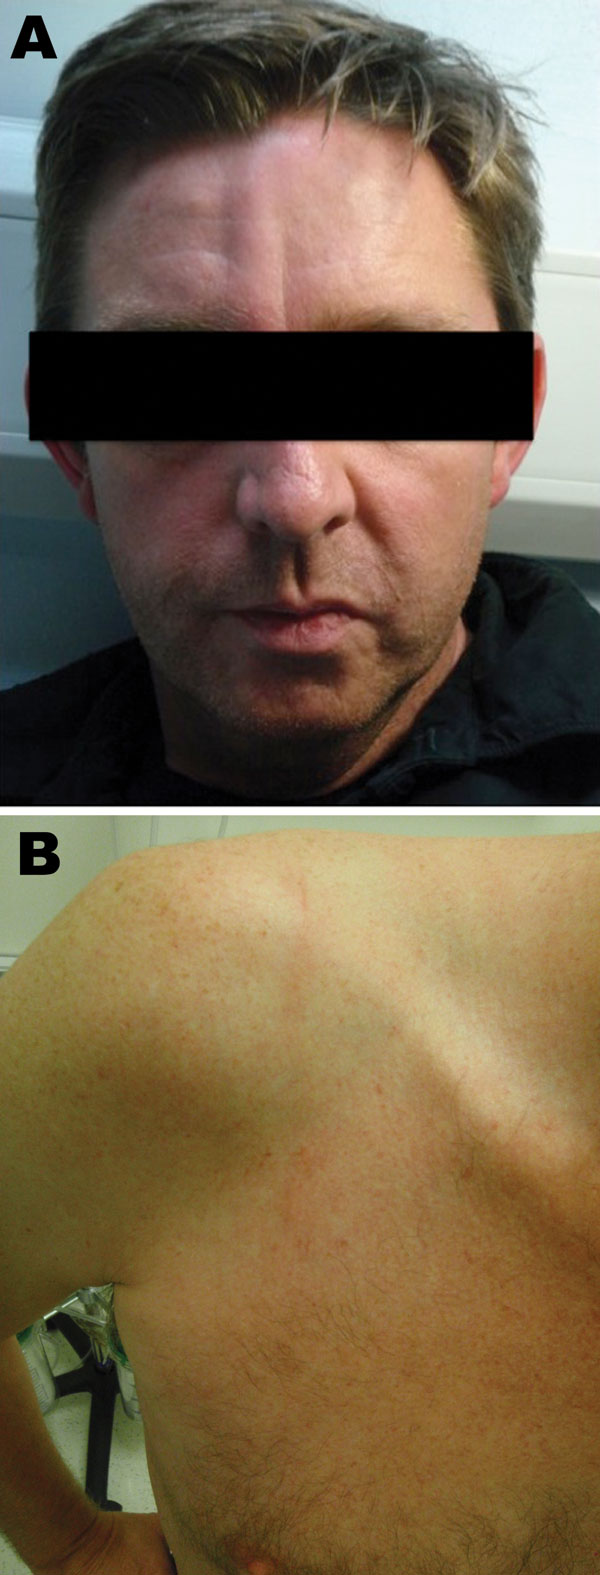 Cutaneous larva migrans on the forehead (A) and shoulder (B) of a male British tourist who had visited Botswana.